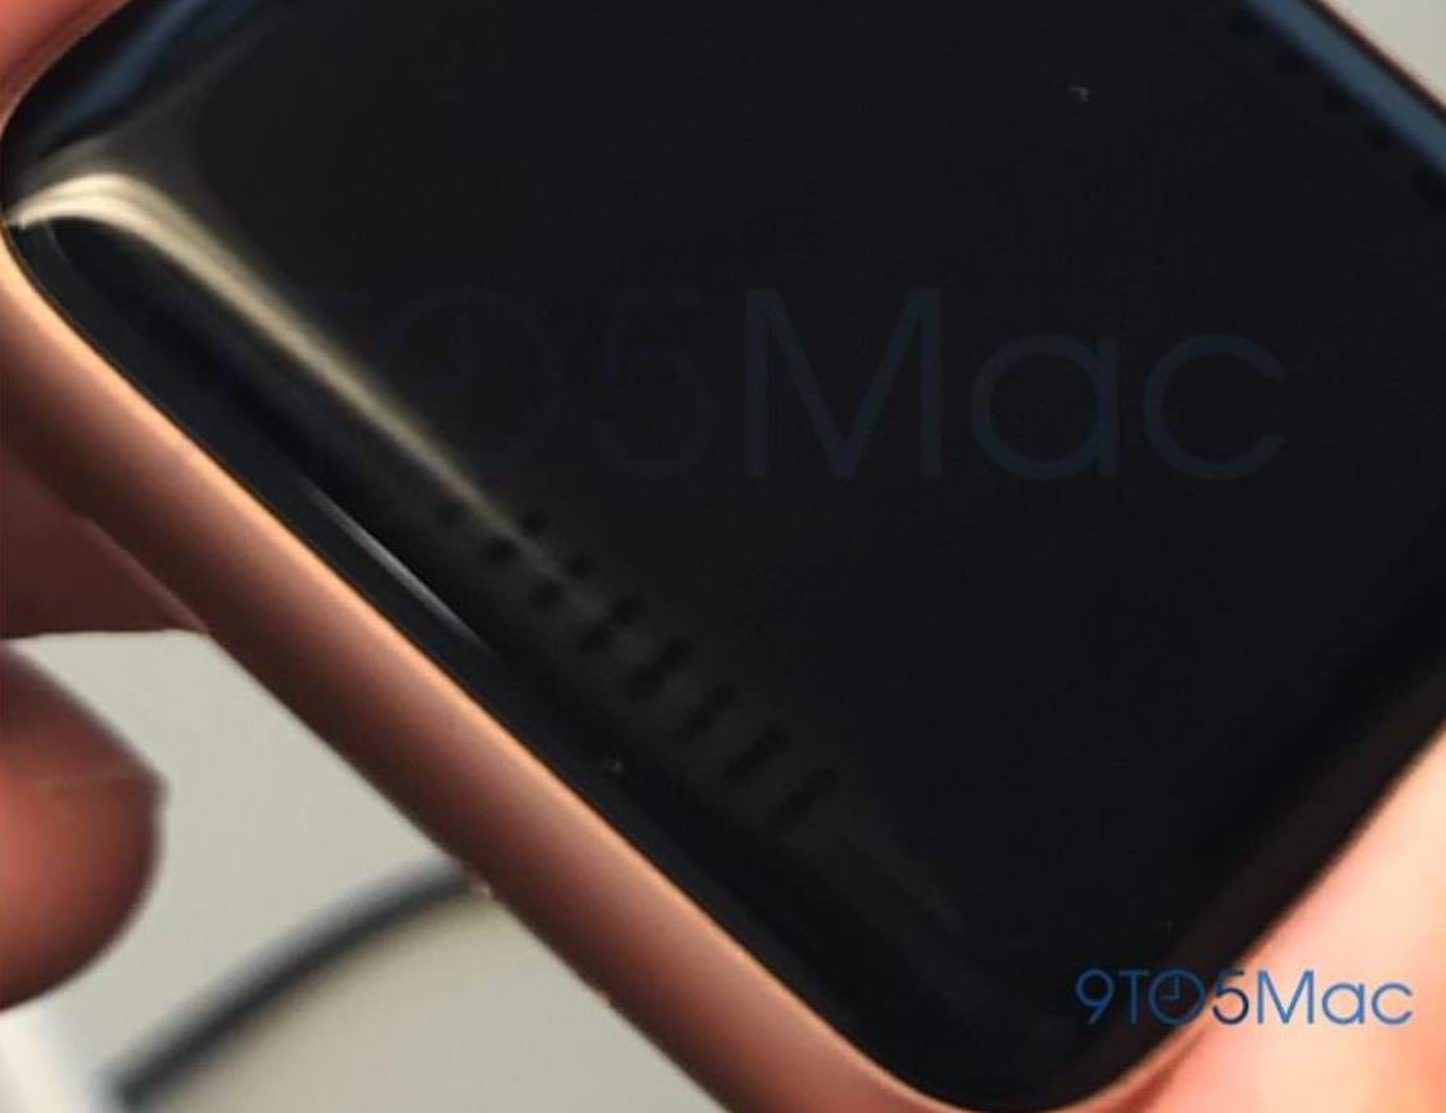 apple-watch-display-edge-stripes-issue-2